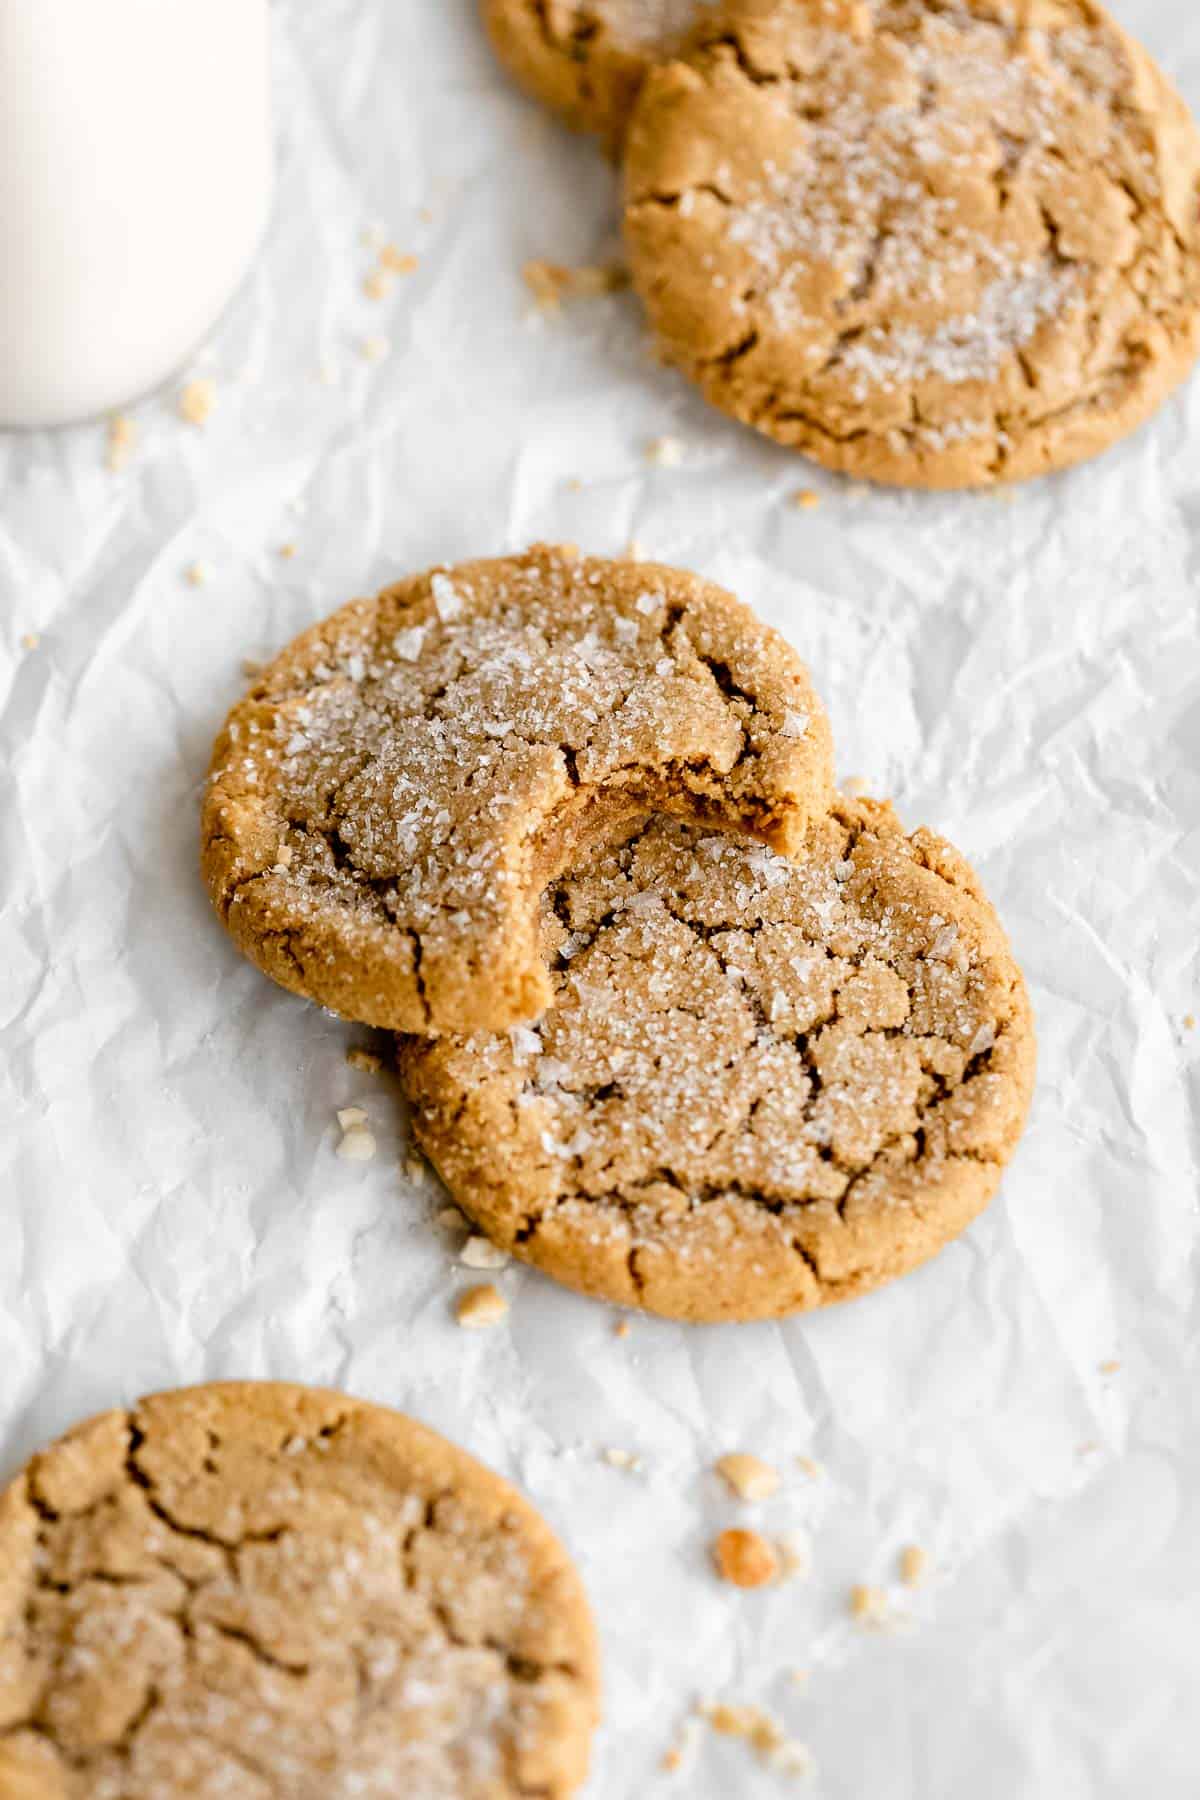 gluten free Peanut butter cookies with sea salt flakes on top.